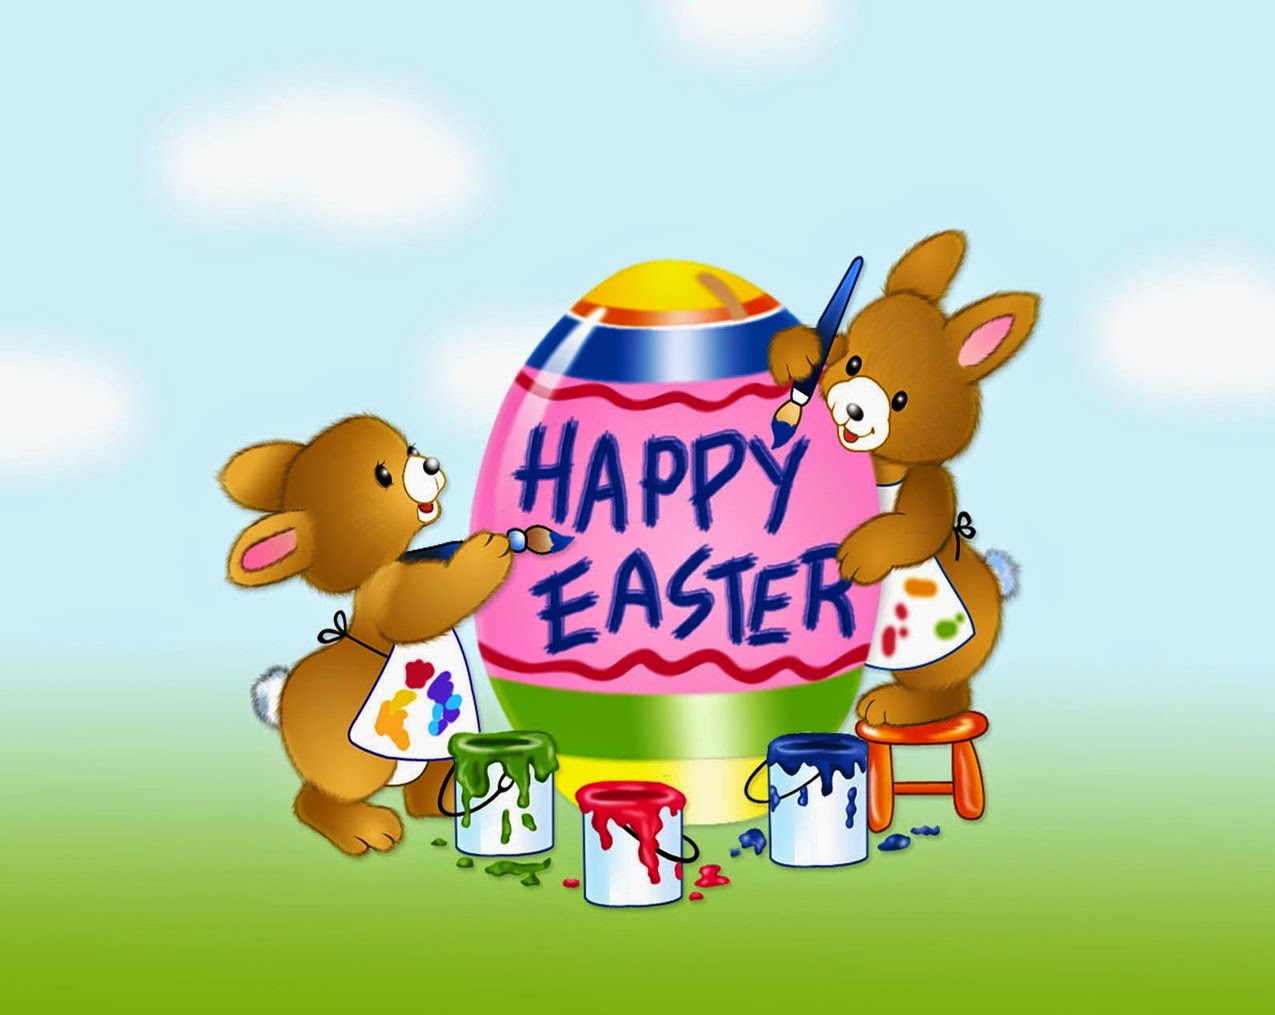 Happy easter day images for whatsapp